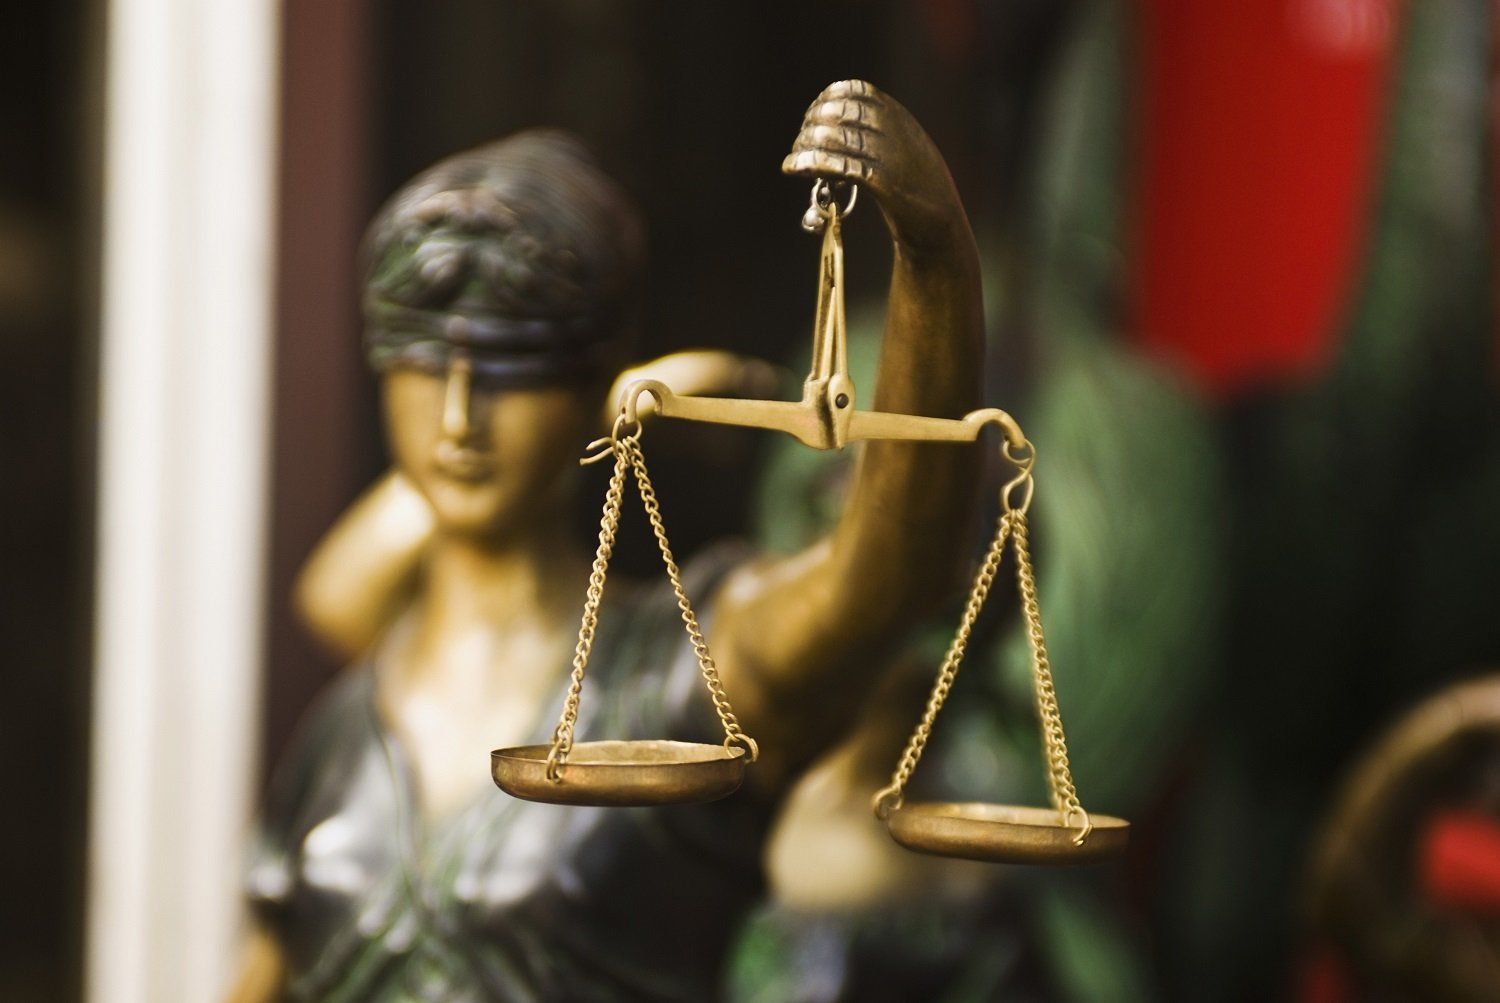 Lady Justice holding scales of justice.